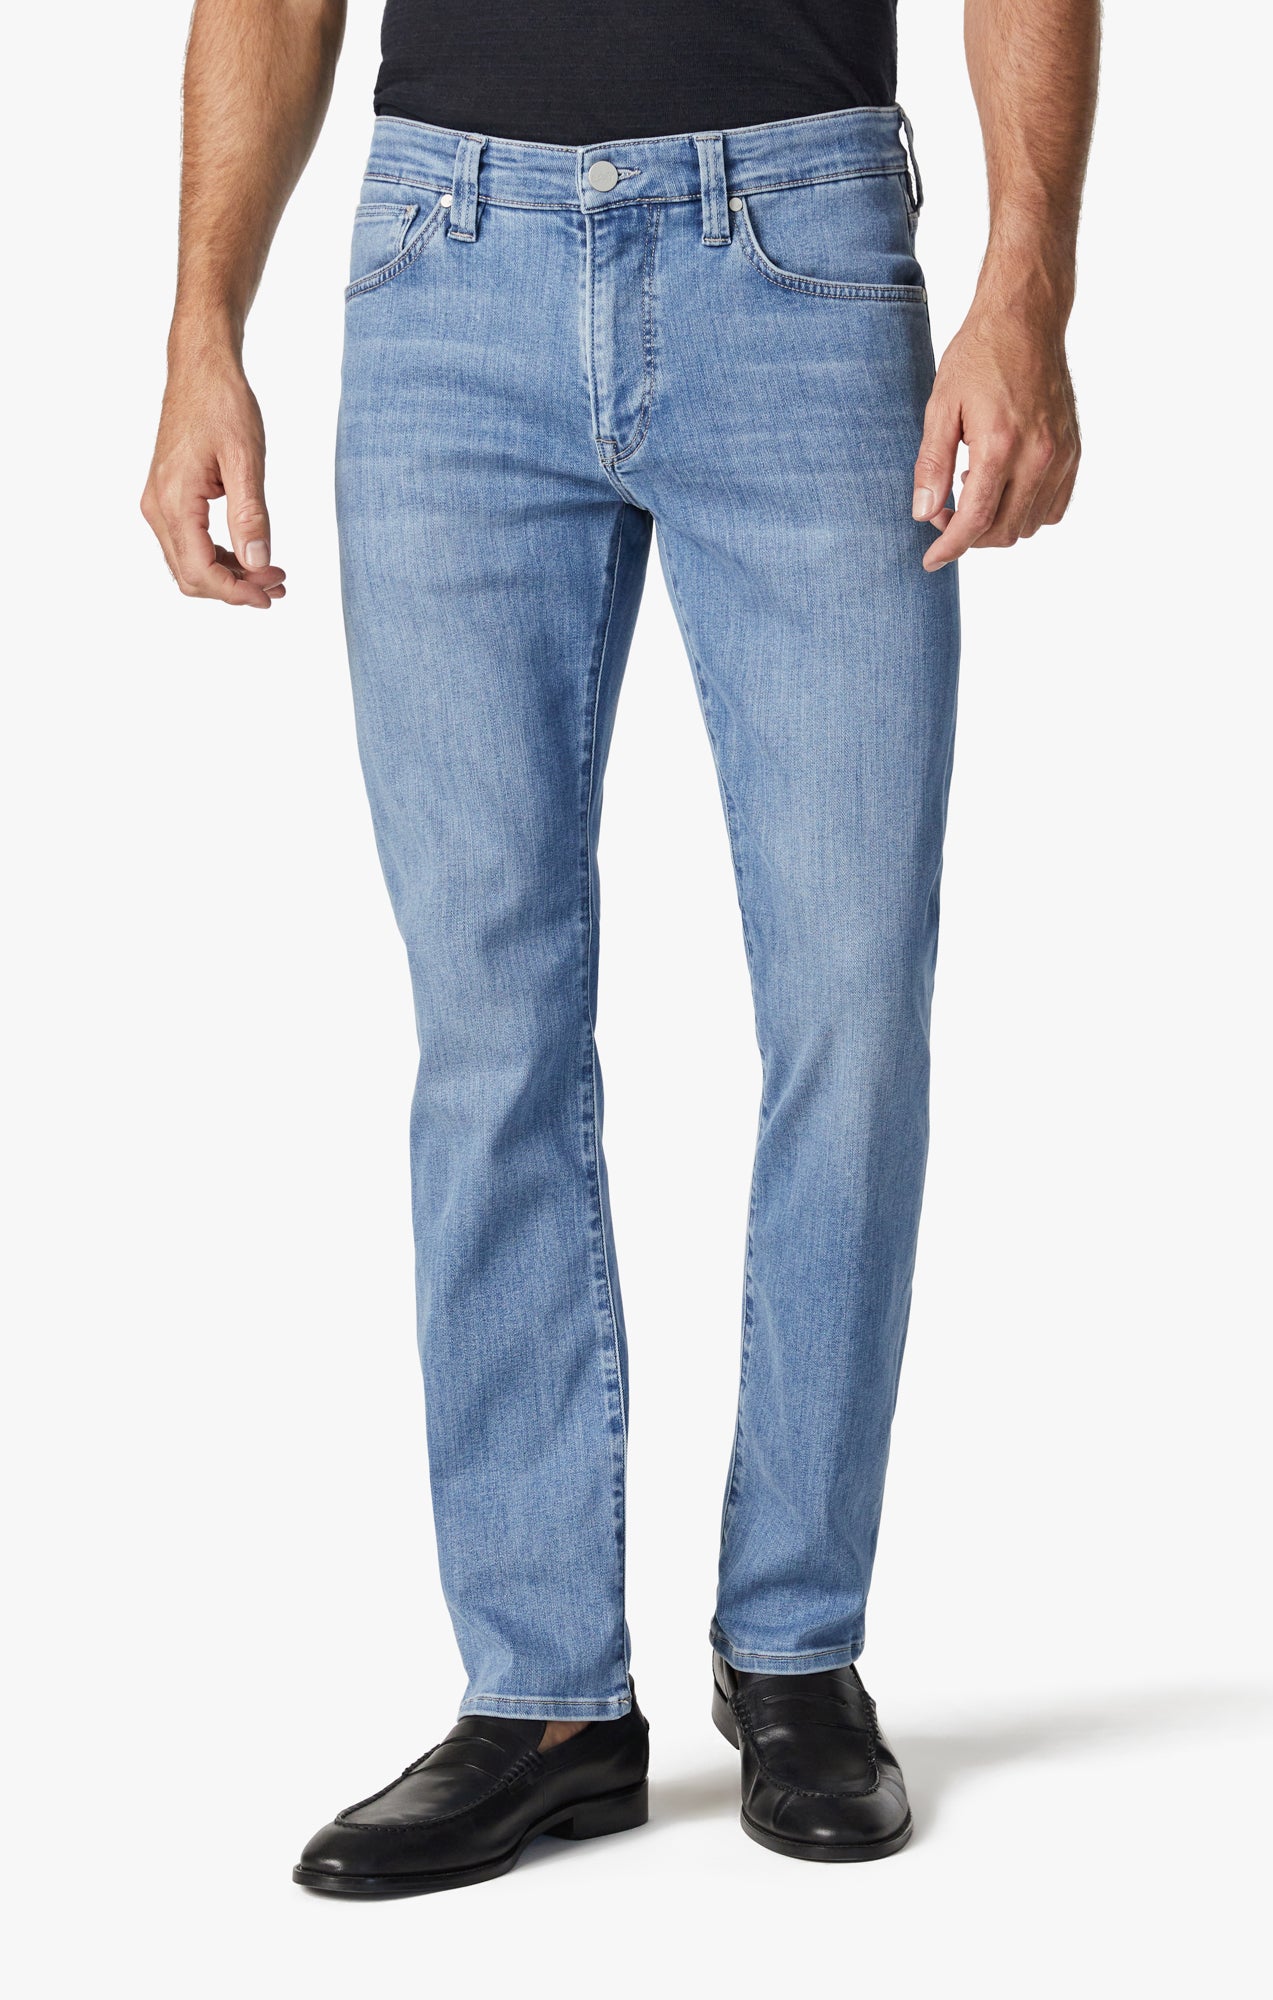 73 Jean - Relaxed Fit Jeans for Men | Billabong